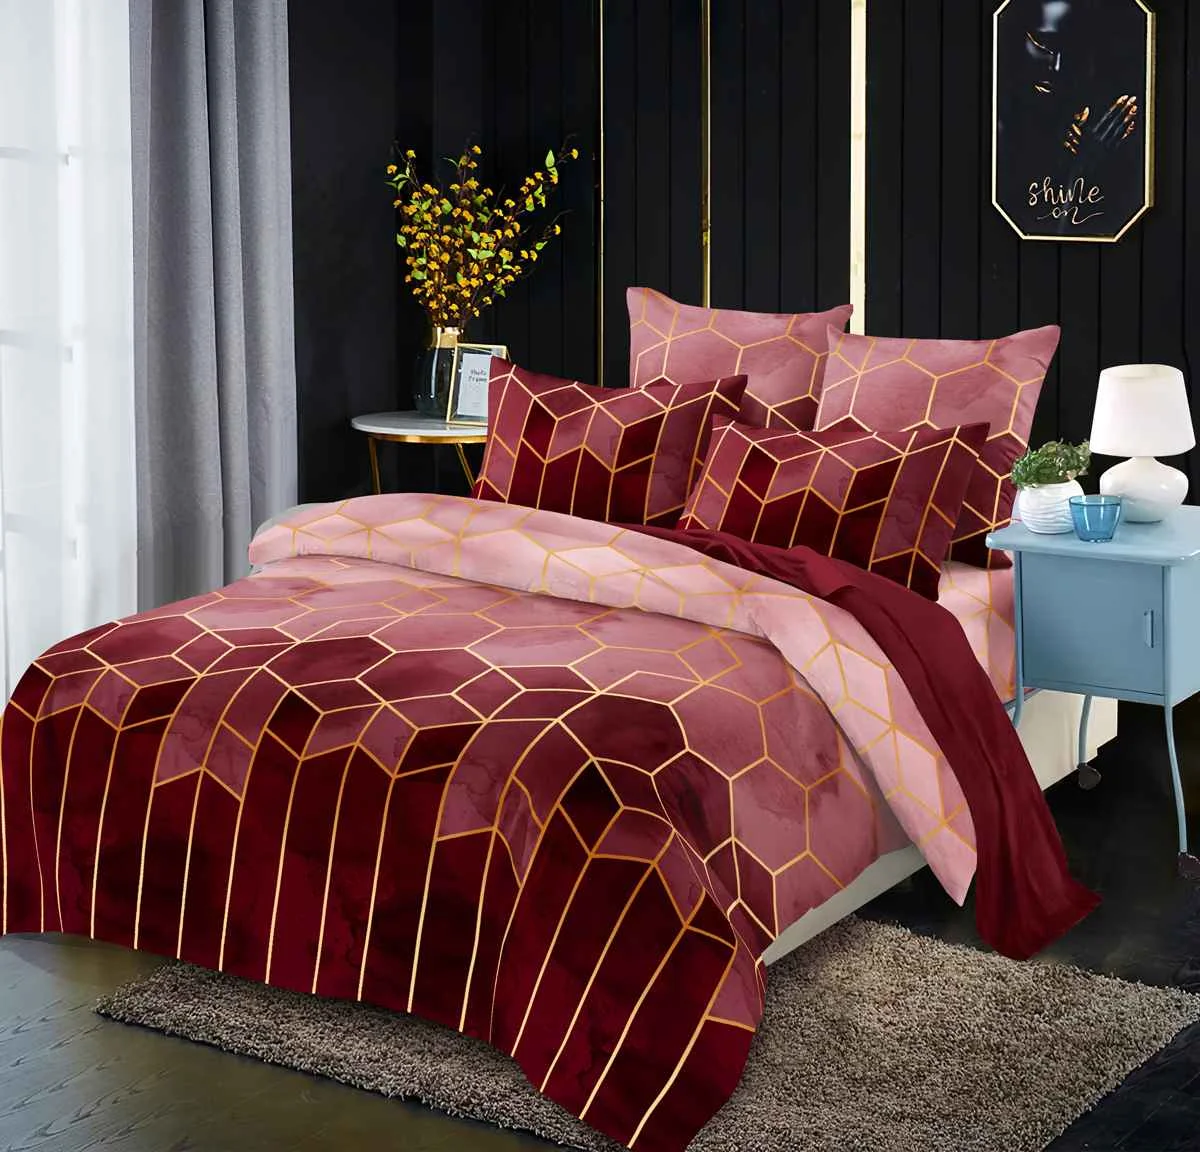 Luxury Duvet Cover Set /3pcs Full/queen/king Size Bedclothes Bedding Sets  Luxury Home Hotel Use(no Filling No Sheet) - Bedding Set - AliExpress